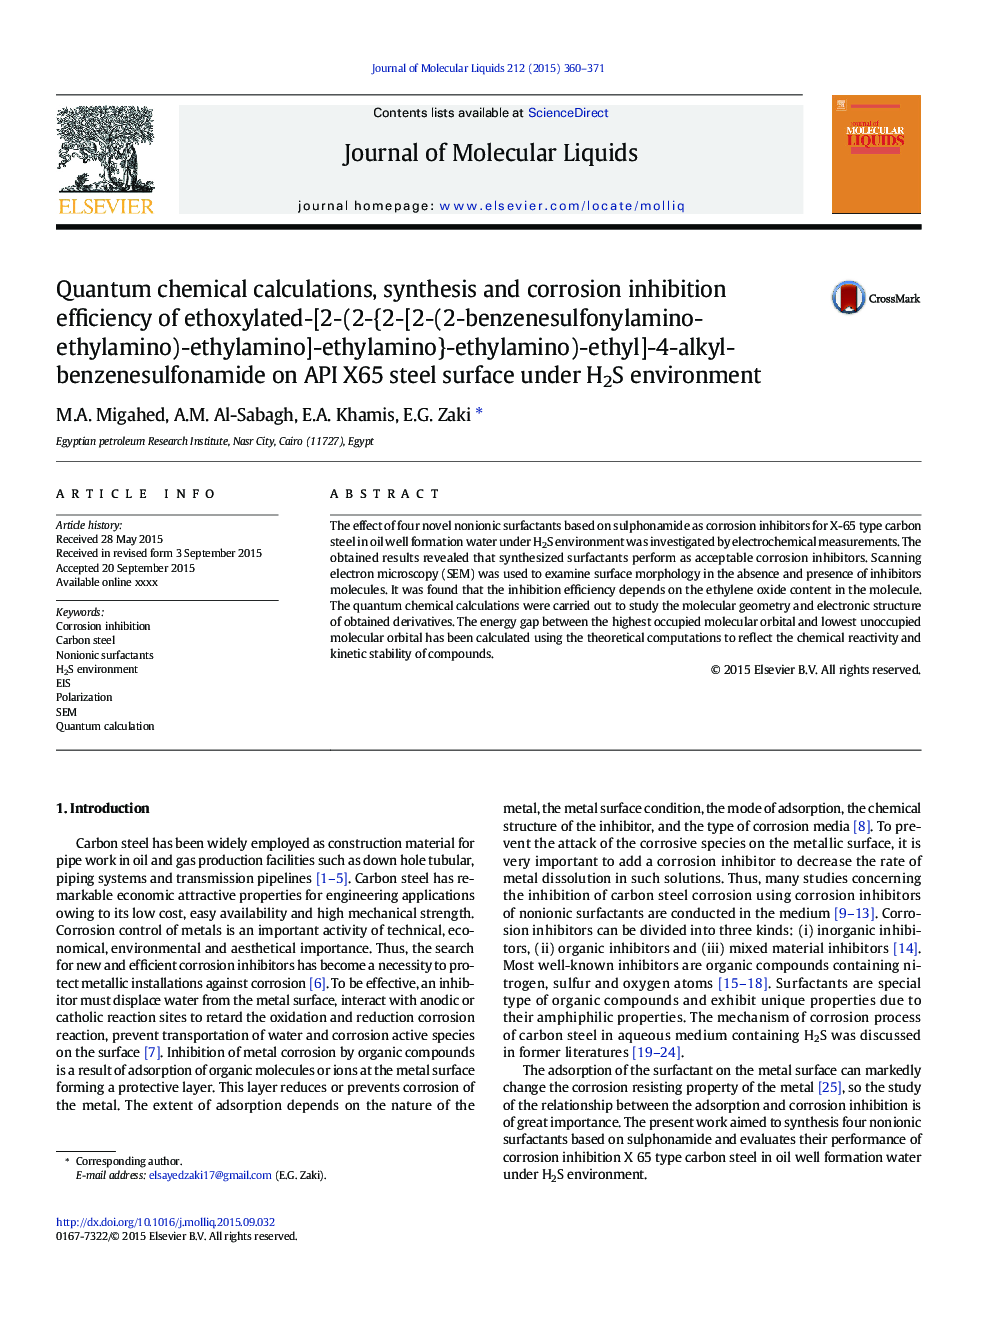 Quantum chemical calculations, synthesis and corrosion inhibition efficiency of ethoxylated-[2-(2-{2-[2-(2-benzenesulfonylamino-ethylamino)-ethylamino]-ethylamino}-ethylamino)-ethyl]-4-alkyl-benzenesulfonamide on API X65 steel surface under H2S environmen